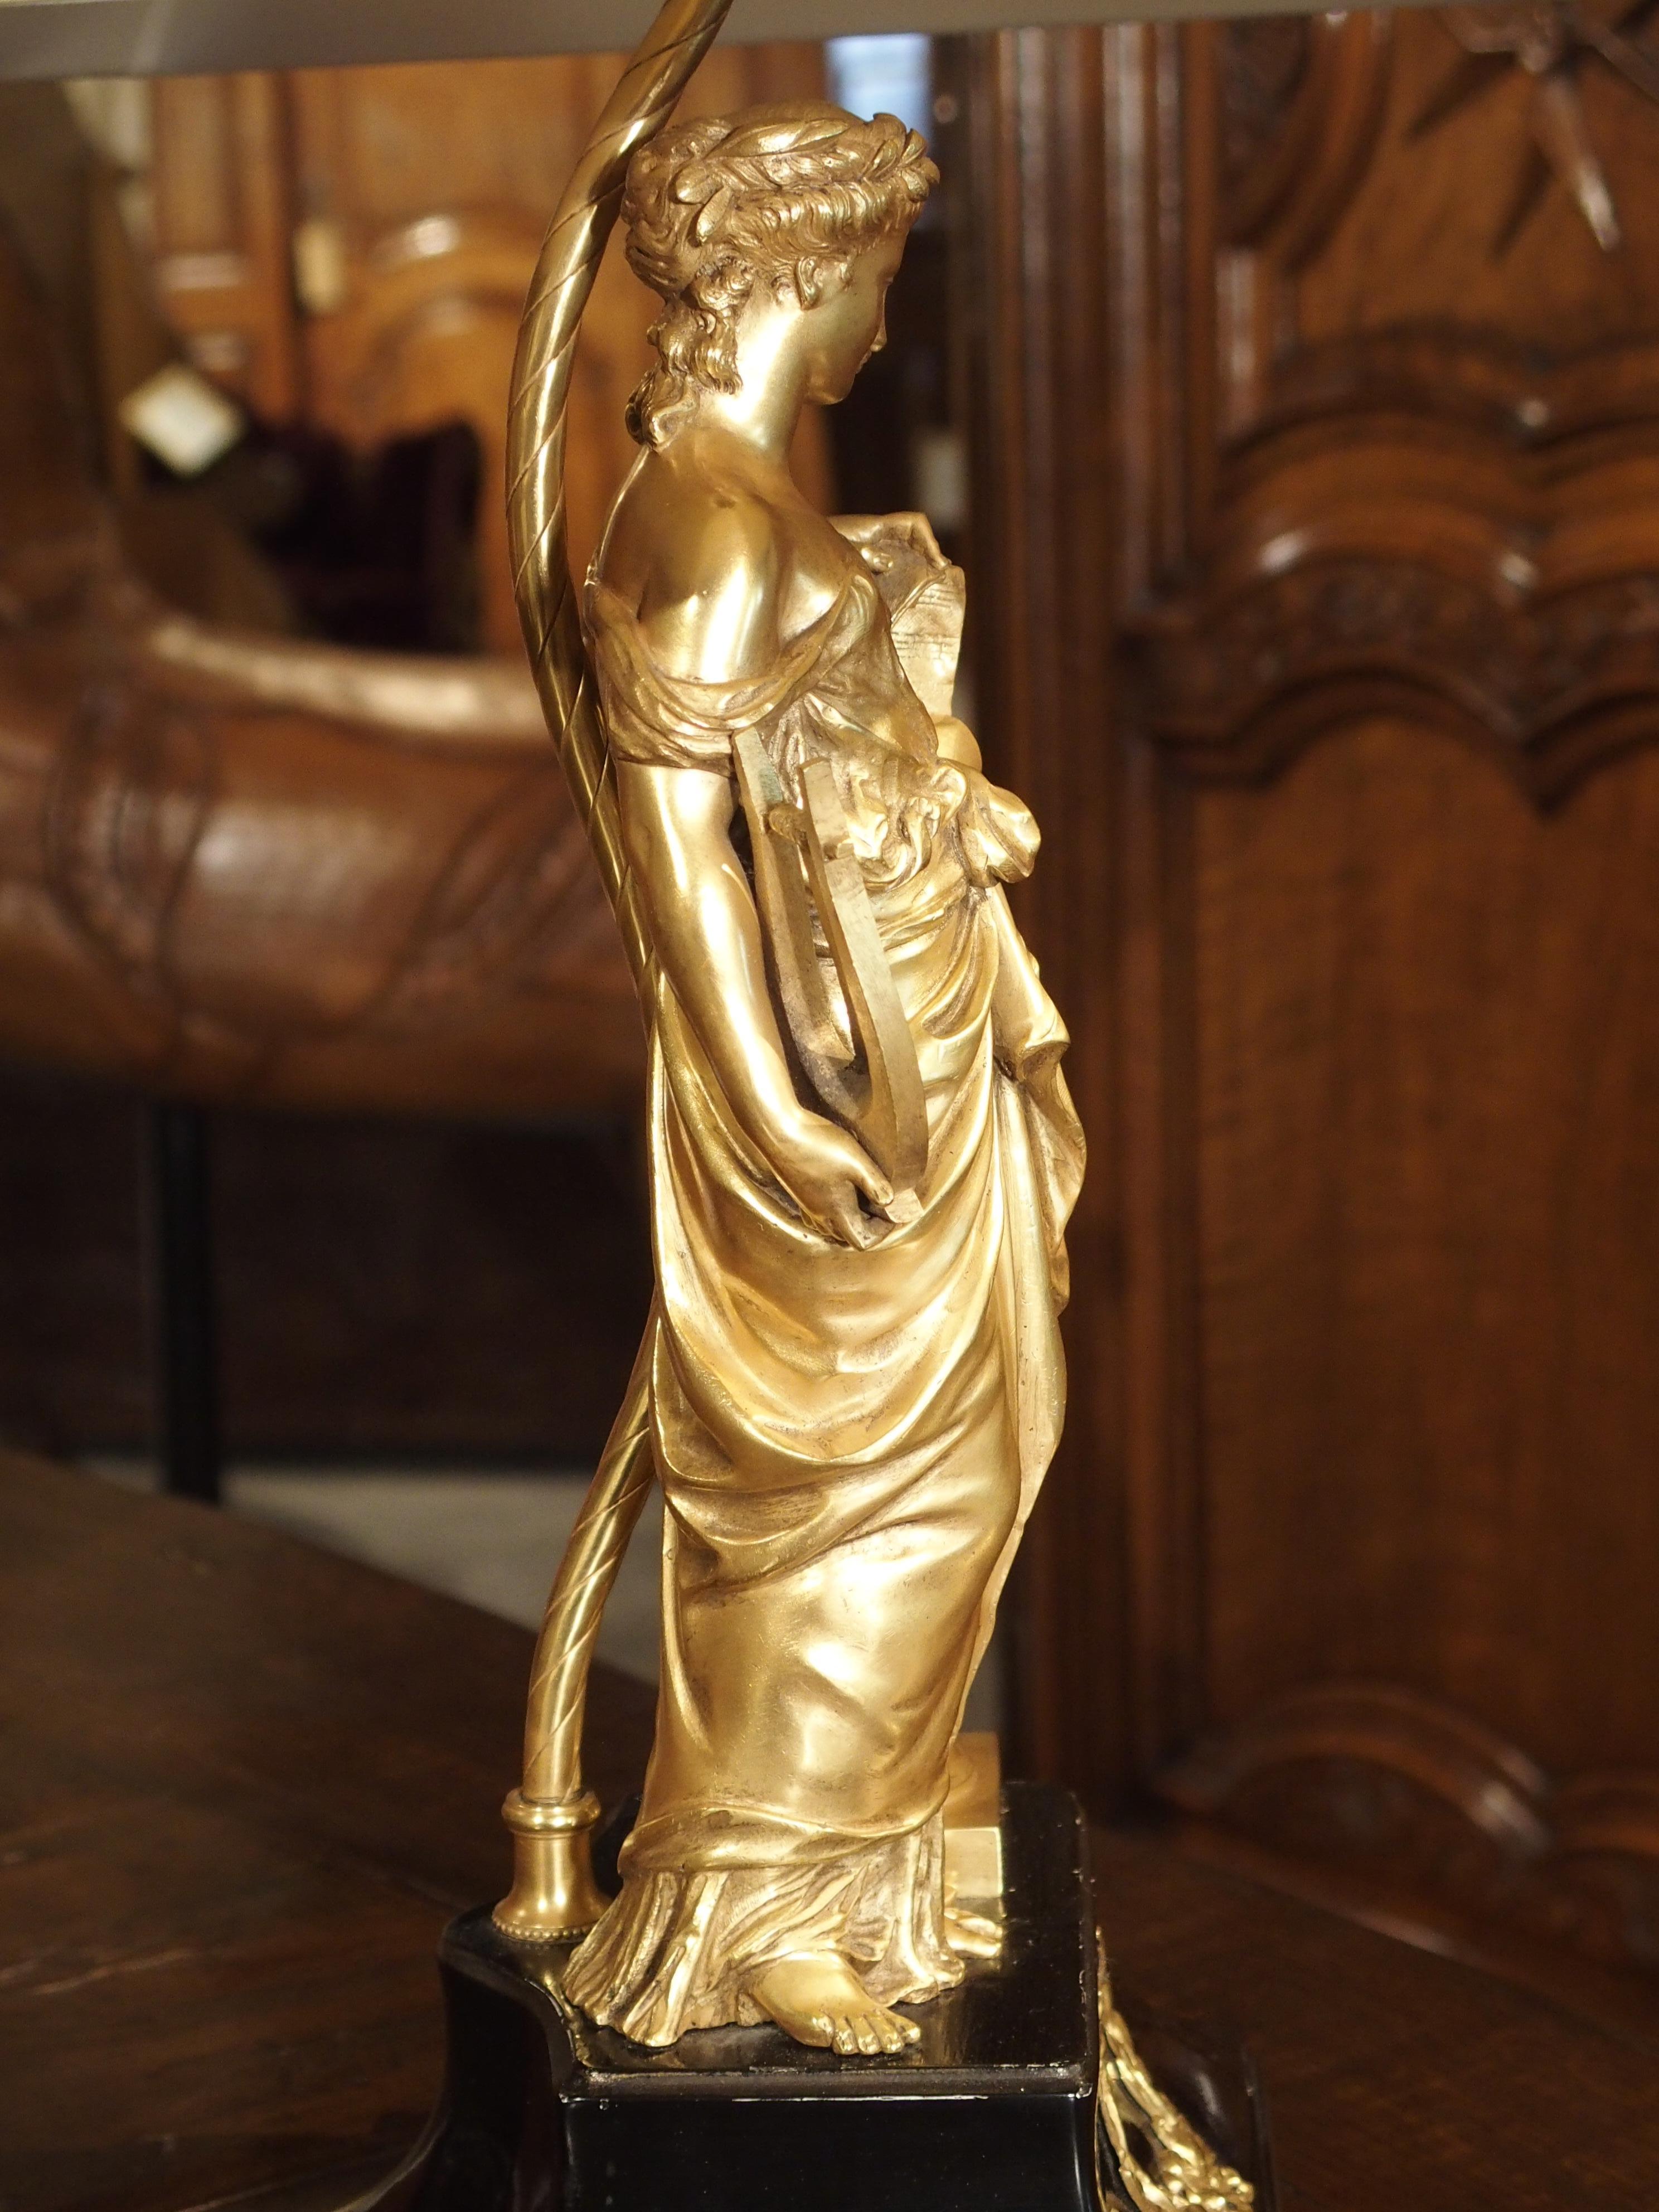 Empire Antique French Gilt Bronze Table Lamp, Signed Moreau, Late 19th Century For Sale